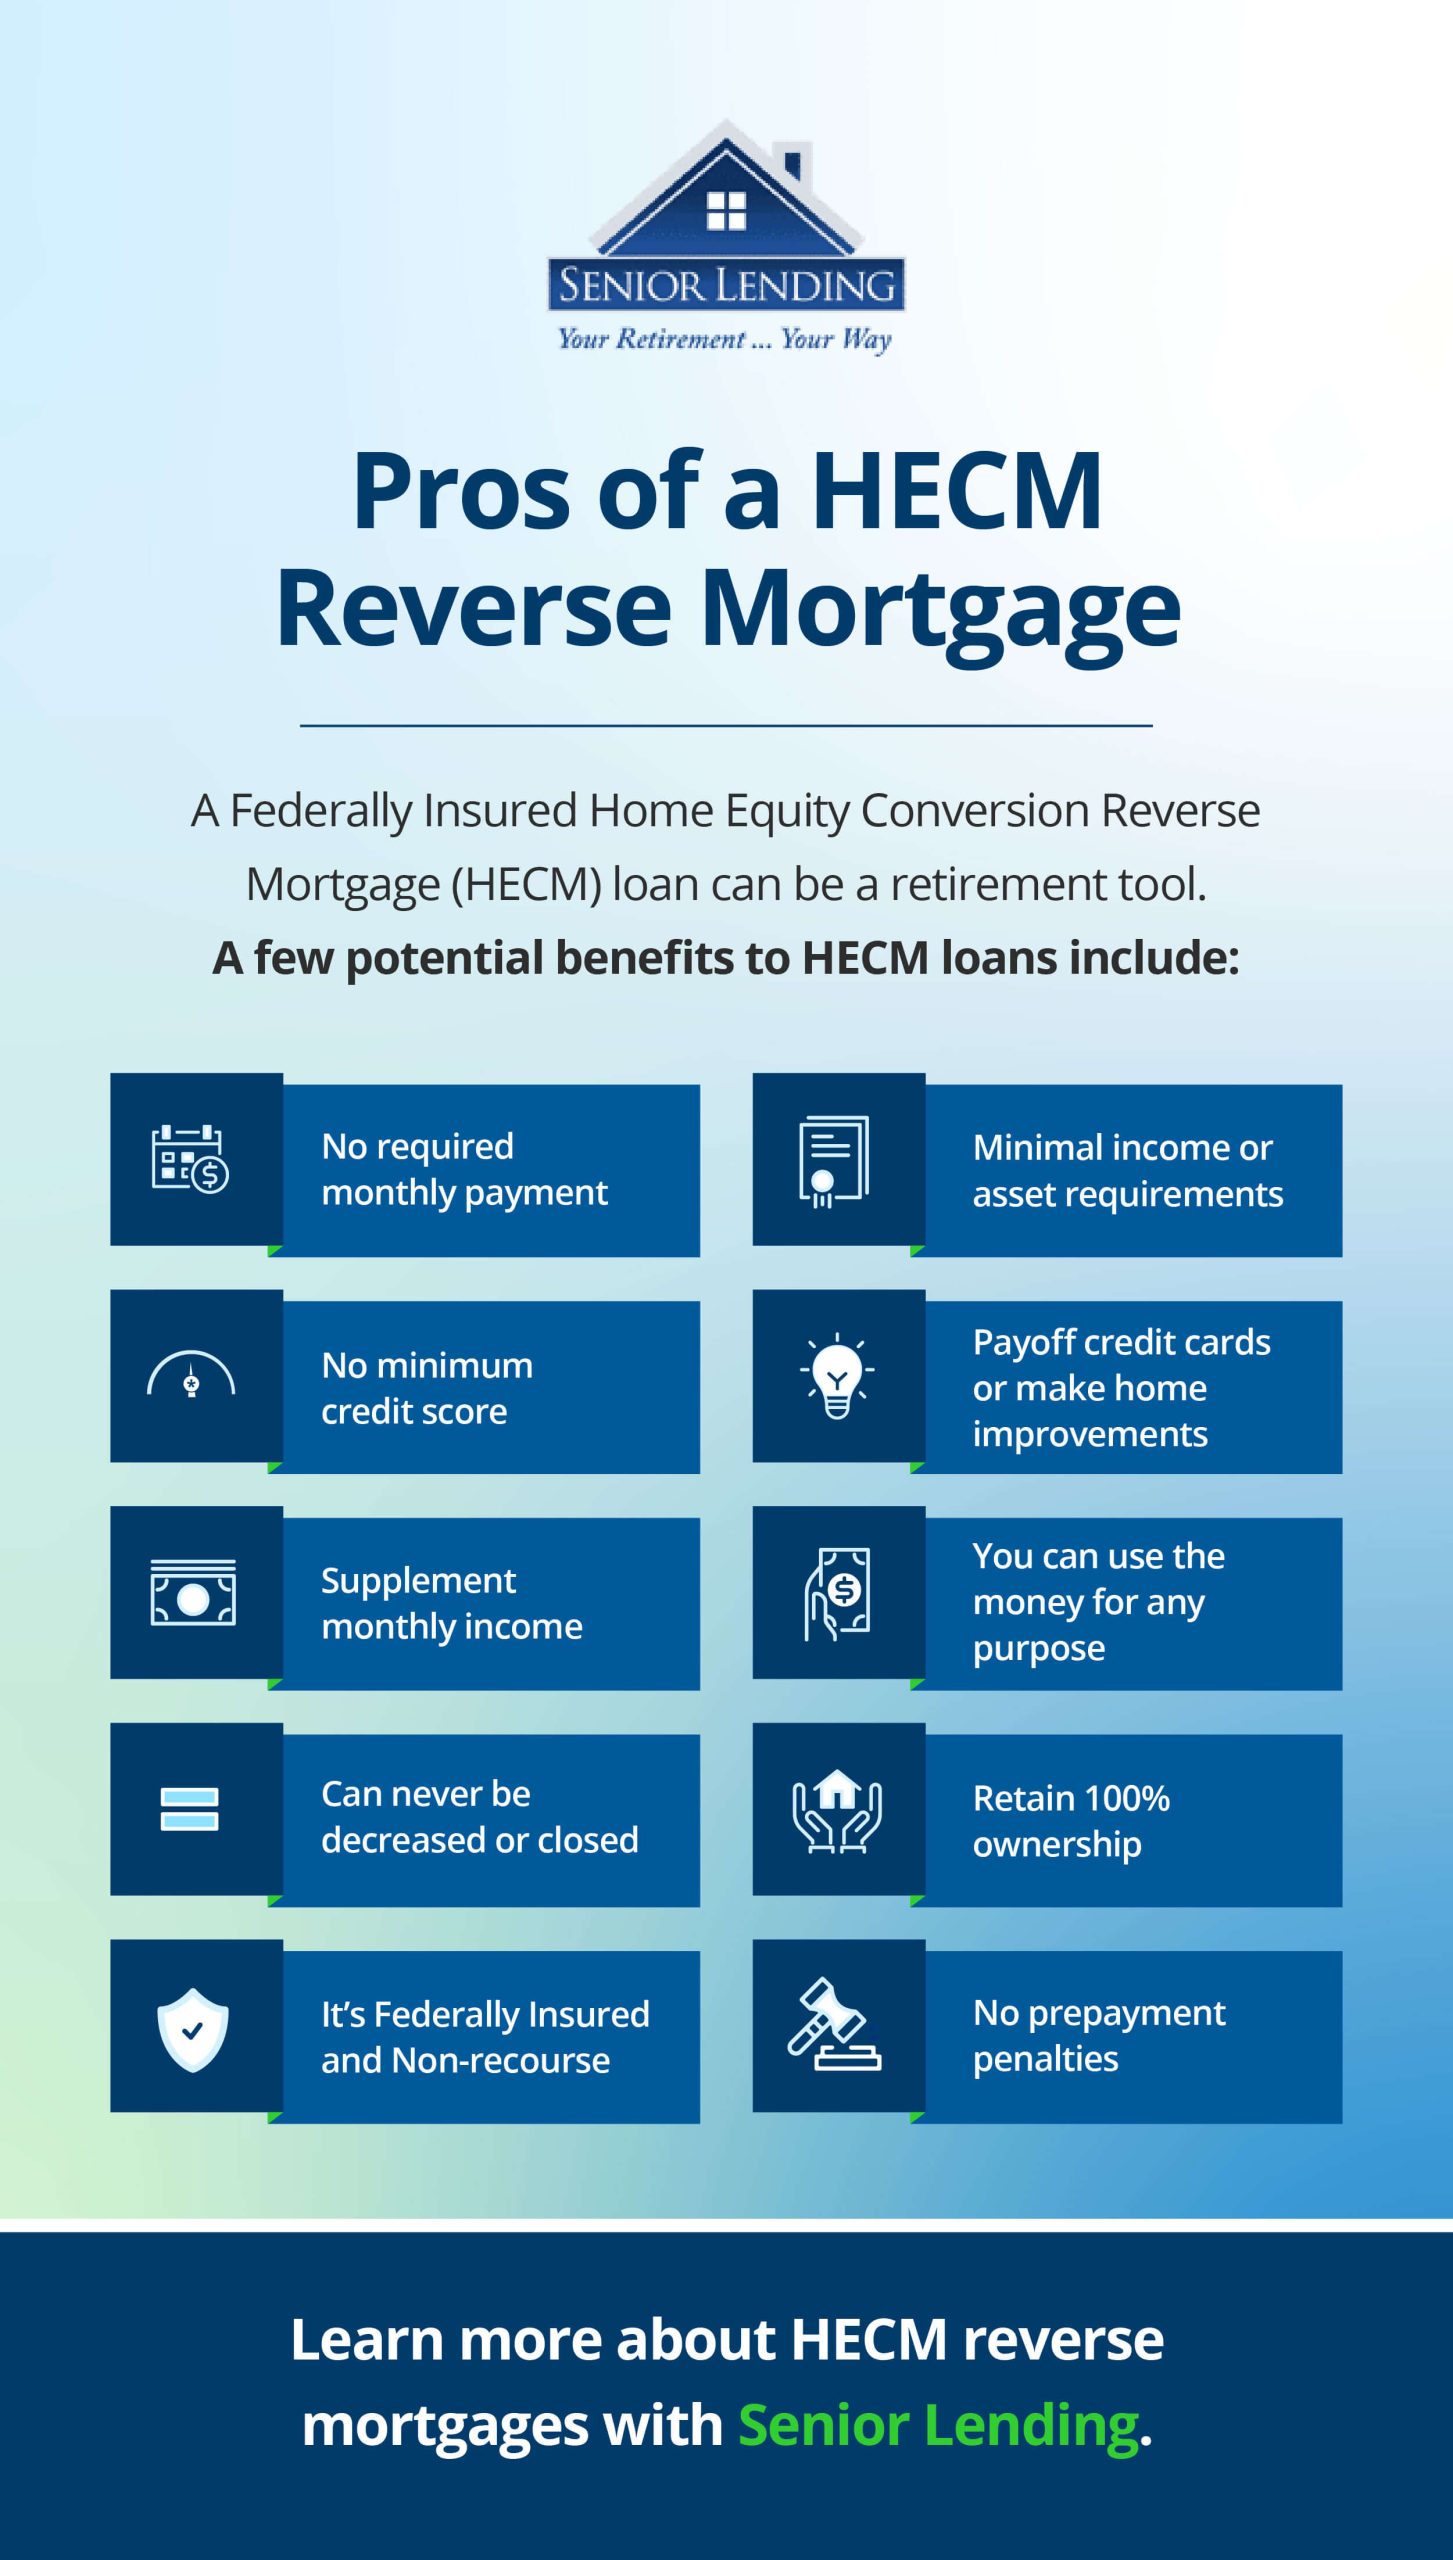 Pros of a HECM reverse mortgage